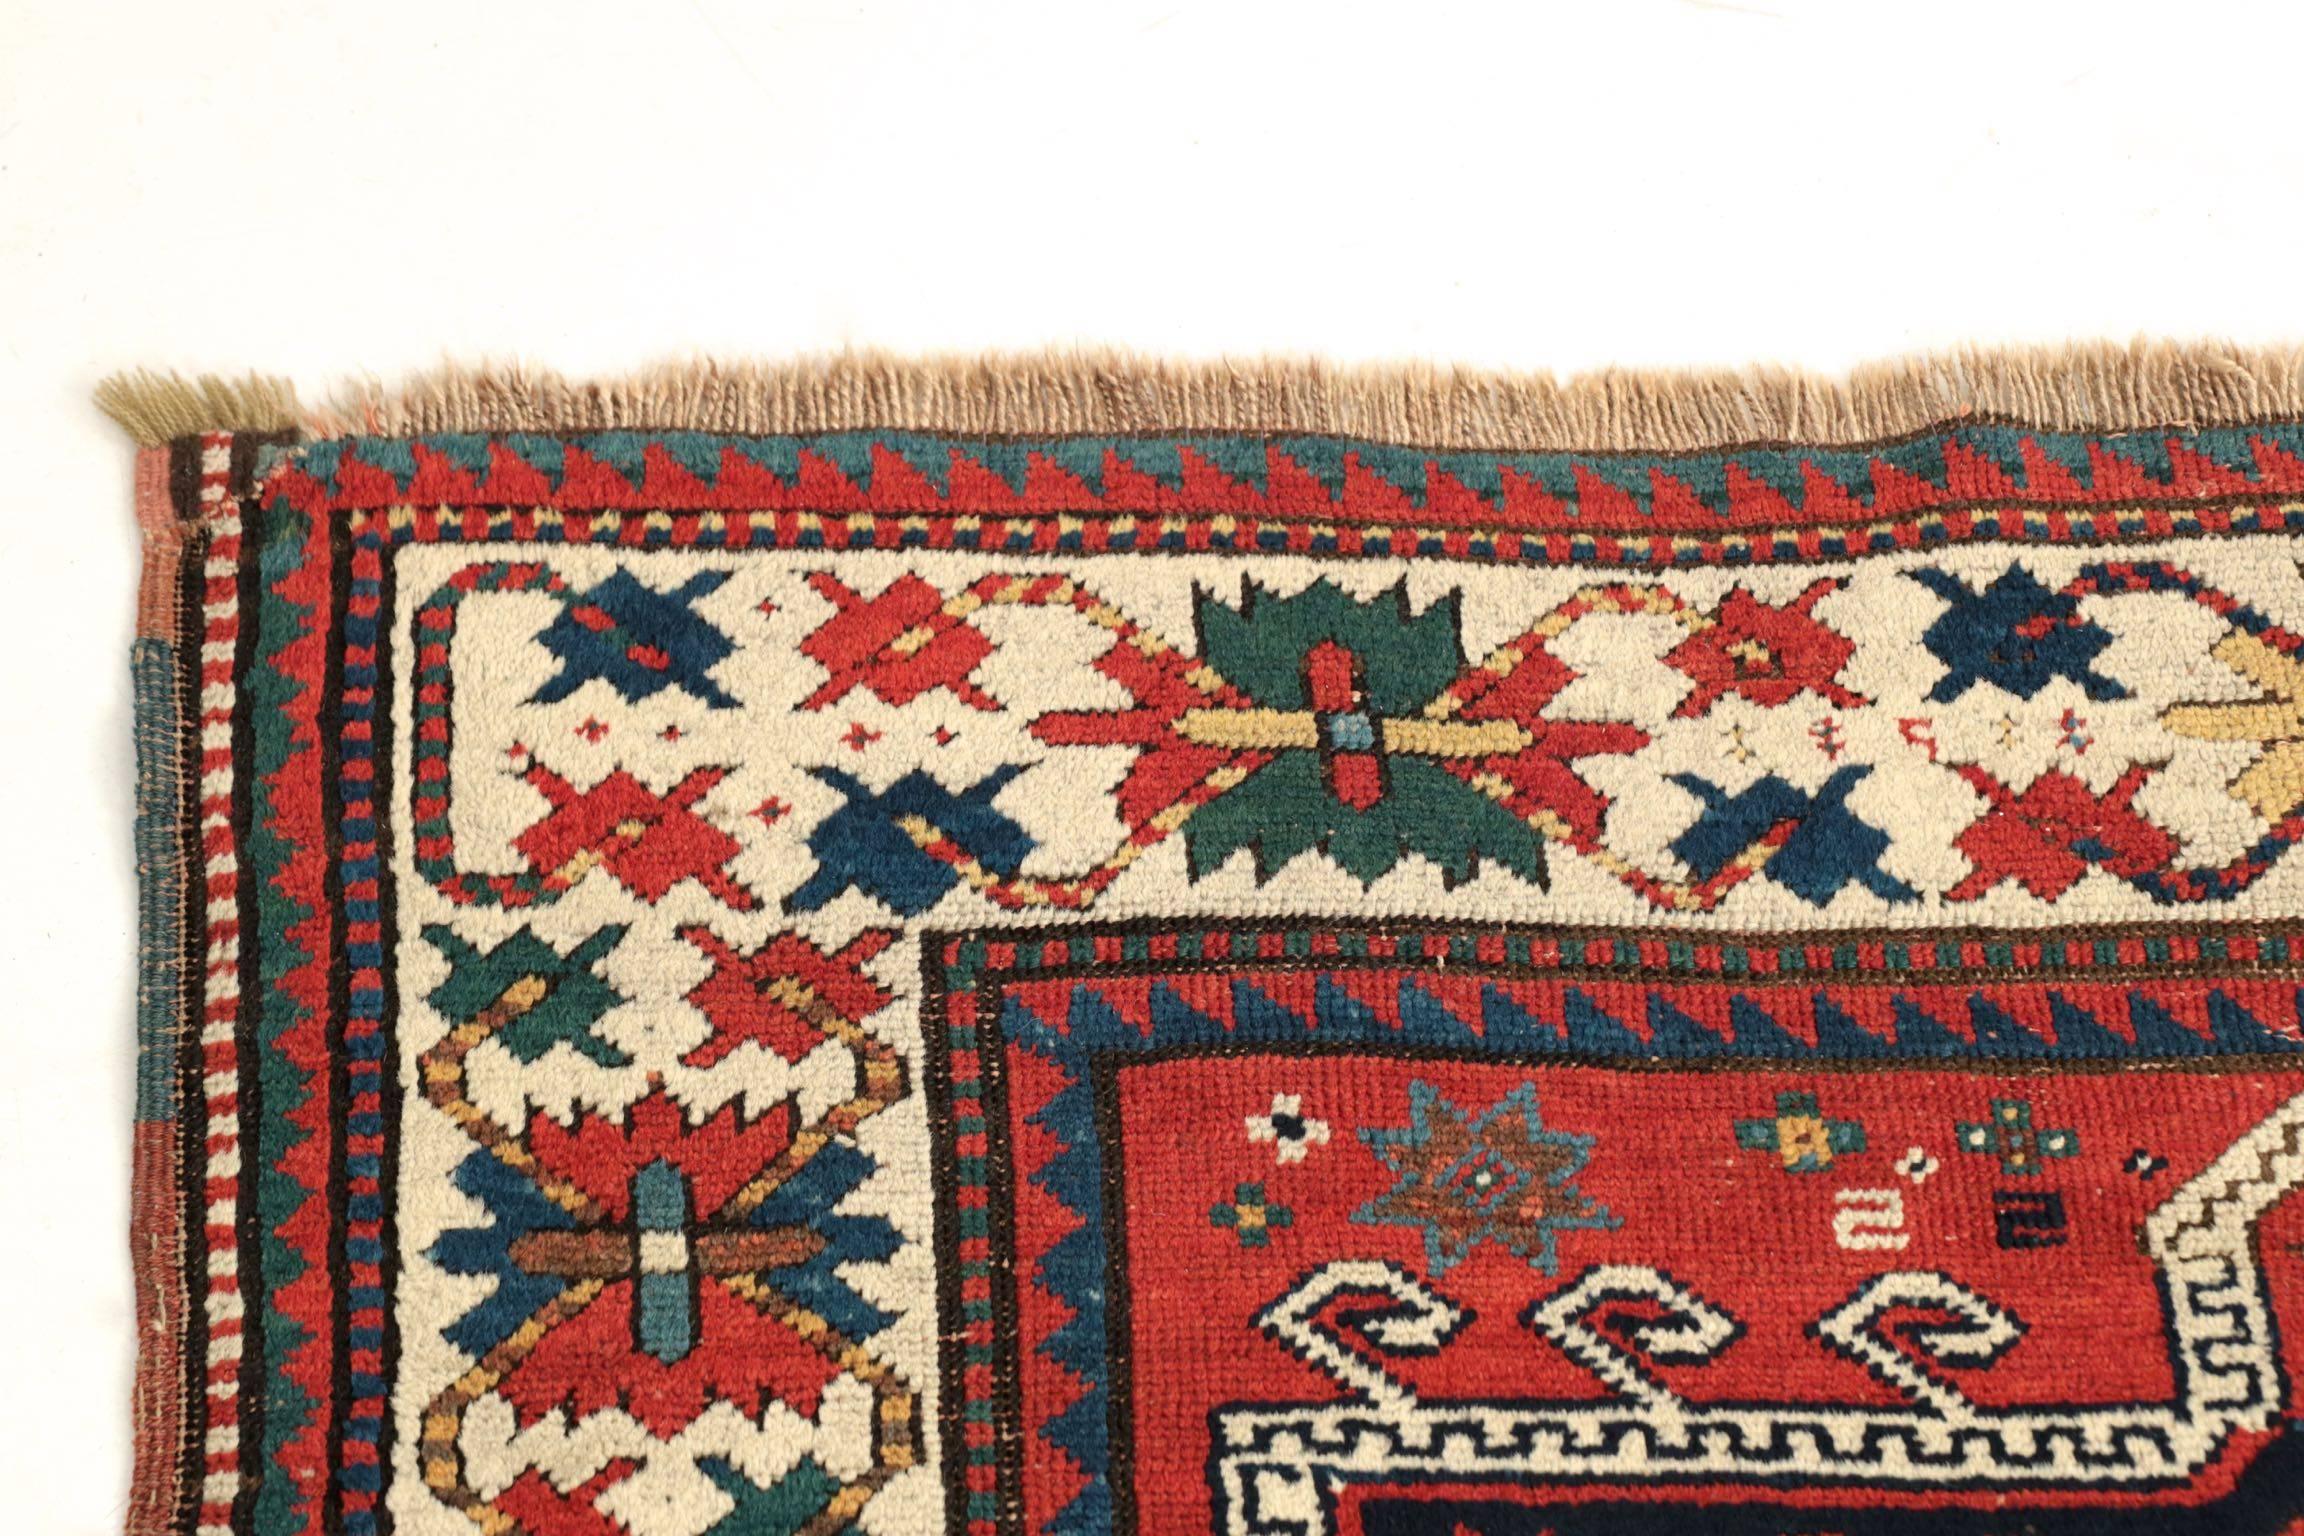 These colorful and vibrant rugs originate in the valleys of Georgia, Armenia and Azerbaijan in the Caucasus. This example was woven circa 1900 with a wealth of motif and bold vegetable dyes. The main border is a powerful display of the repeating and